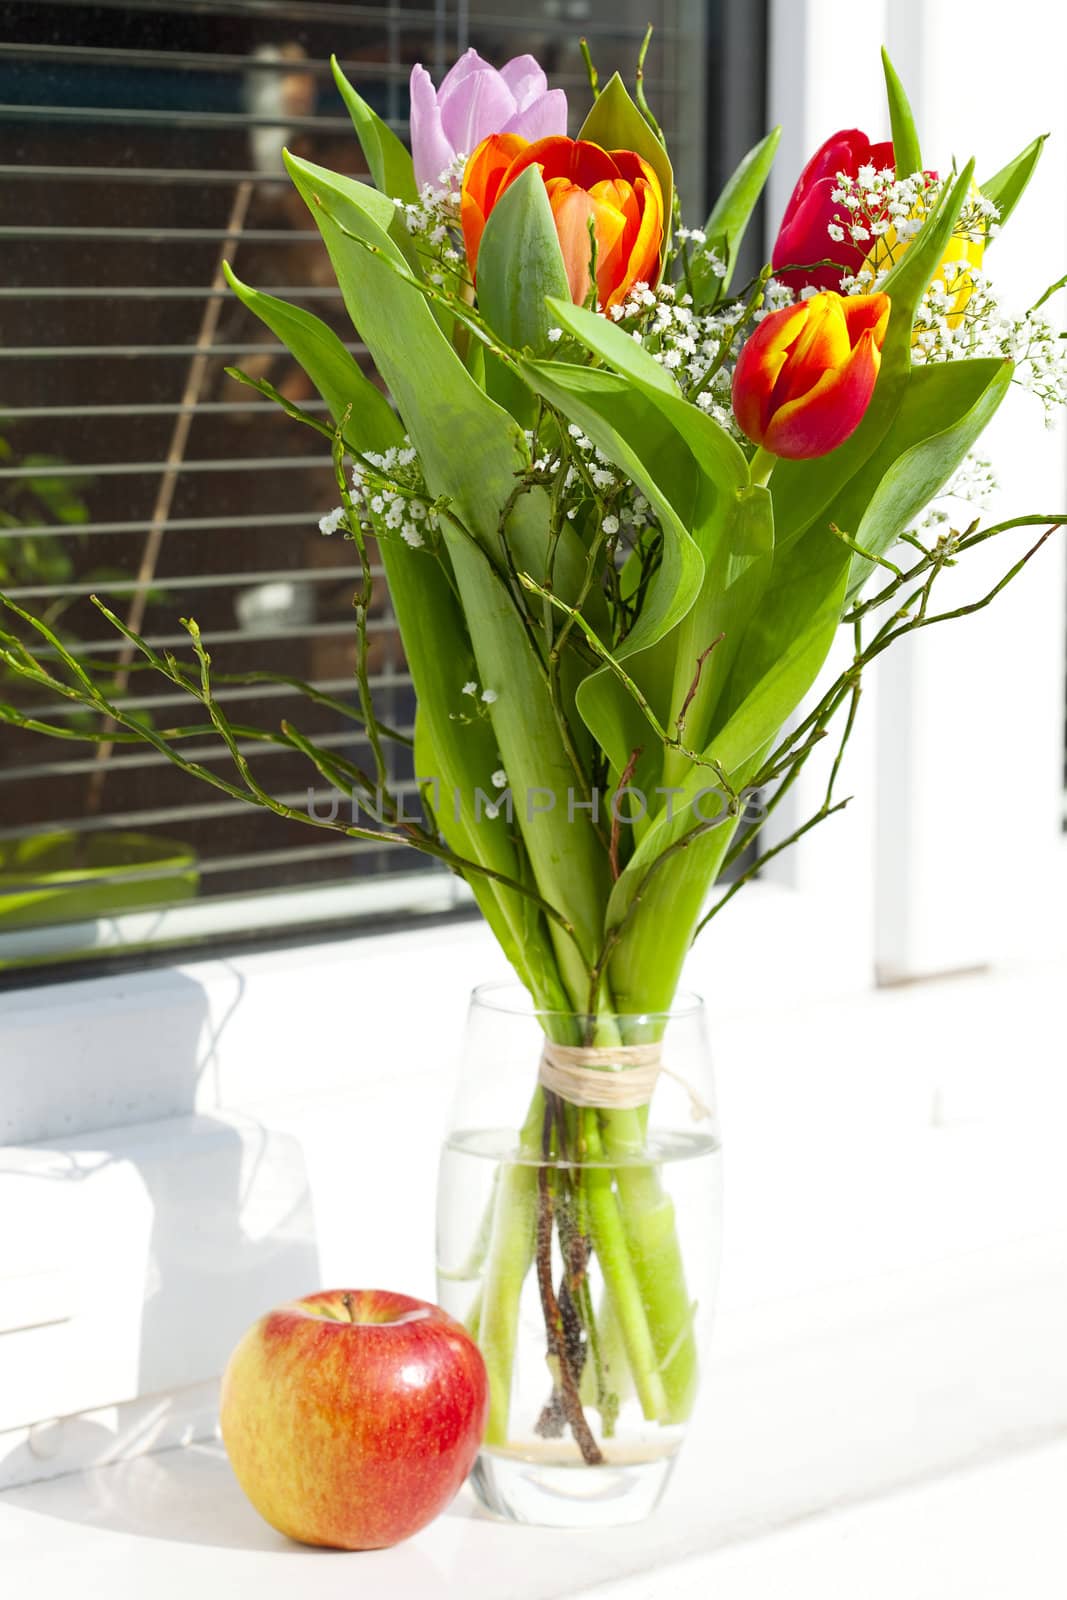 spring bouquet with tulips and an apple by jannyjus